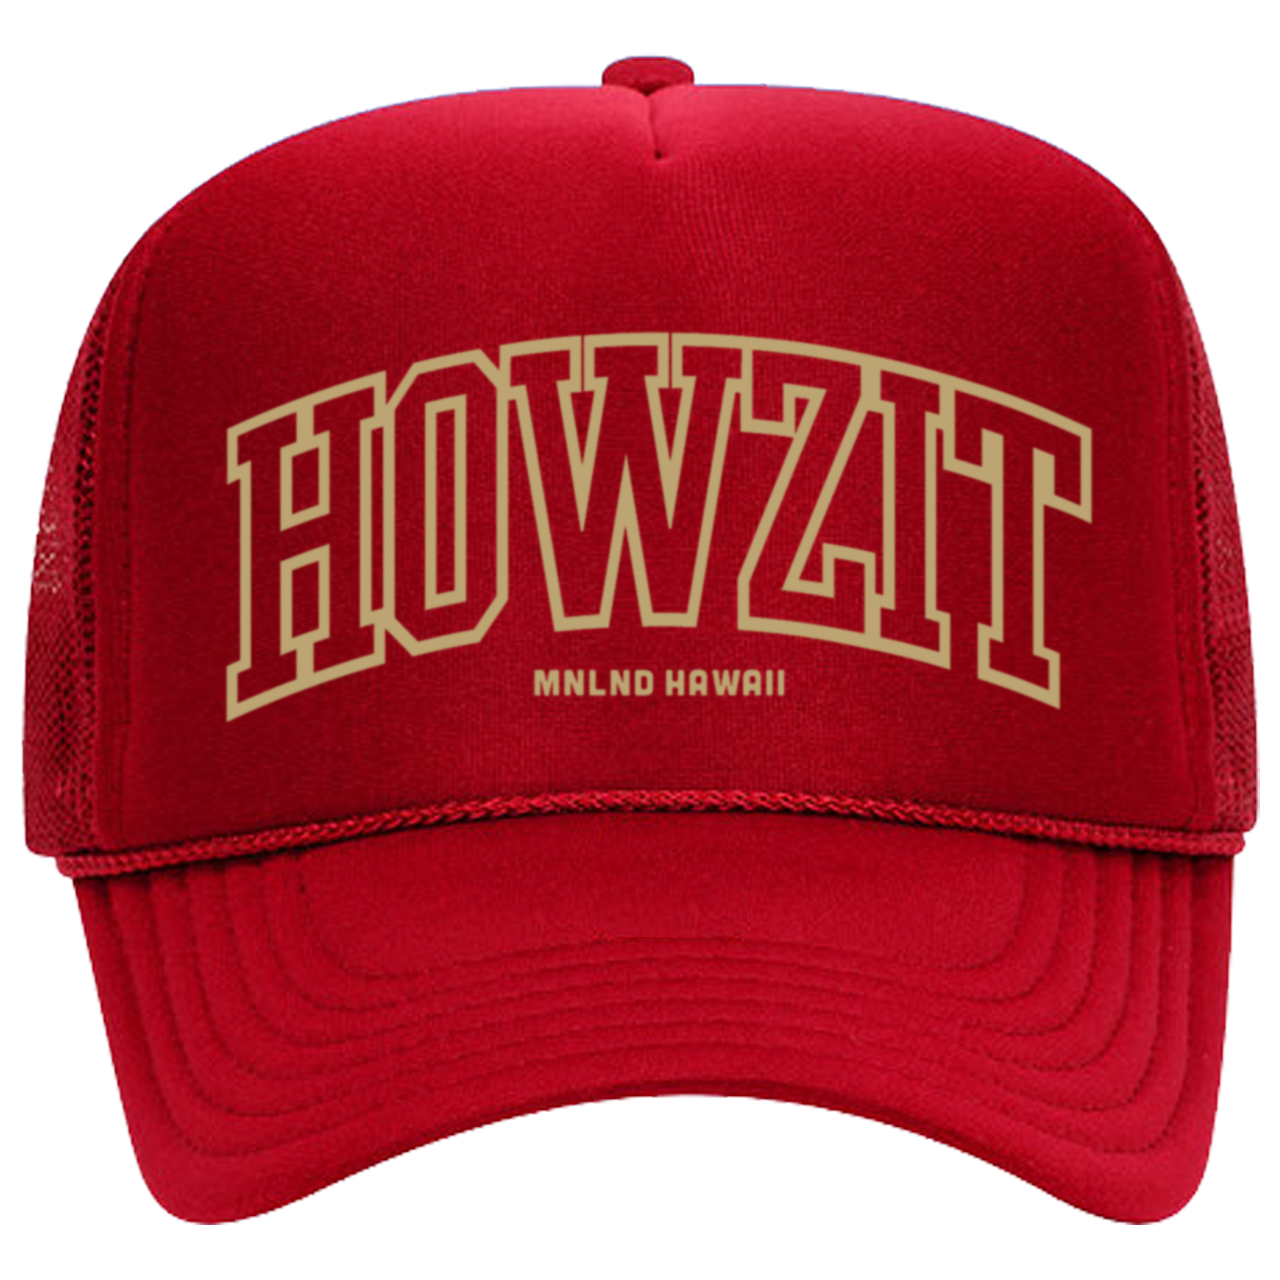 Howzit - Youth Trucker Hat (More Colors Available)